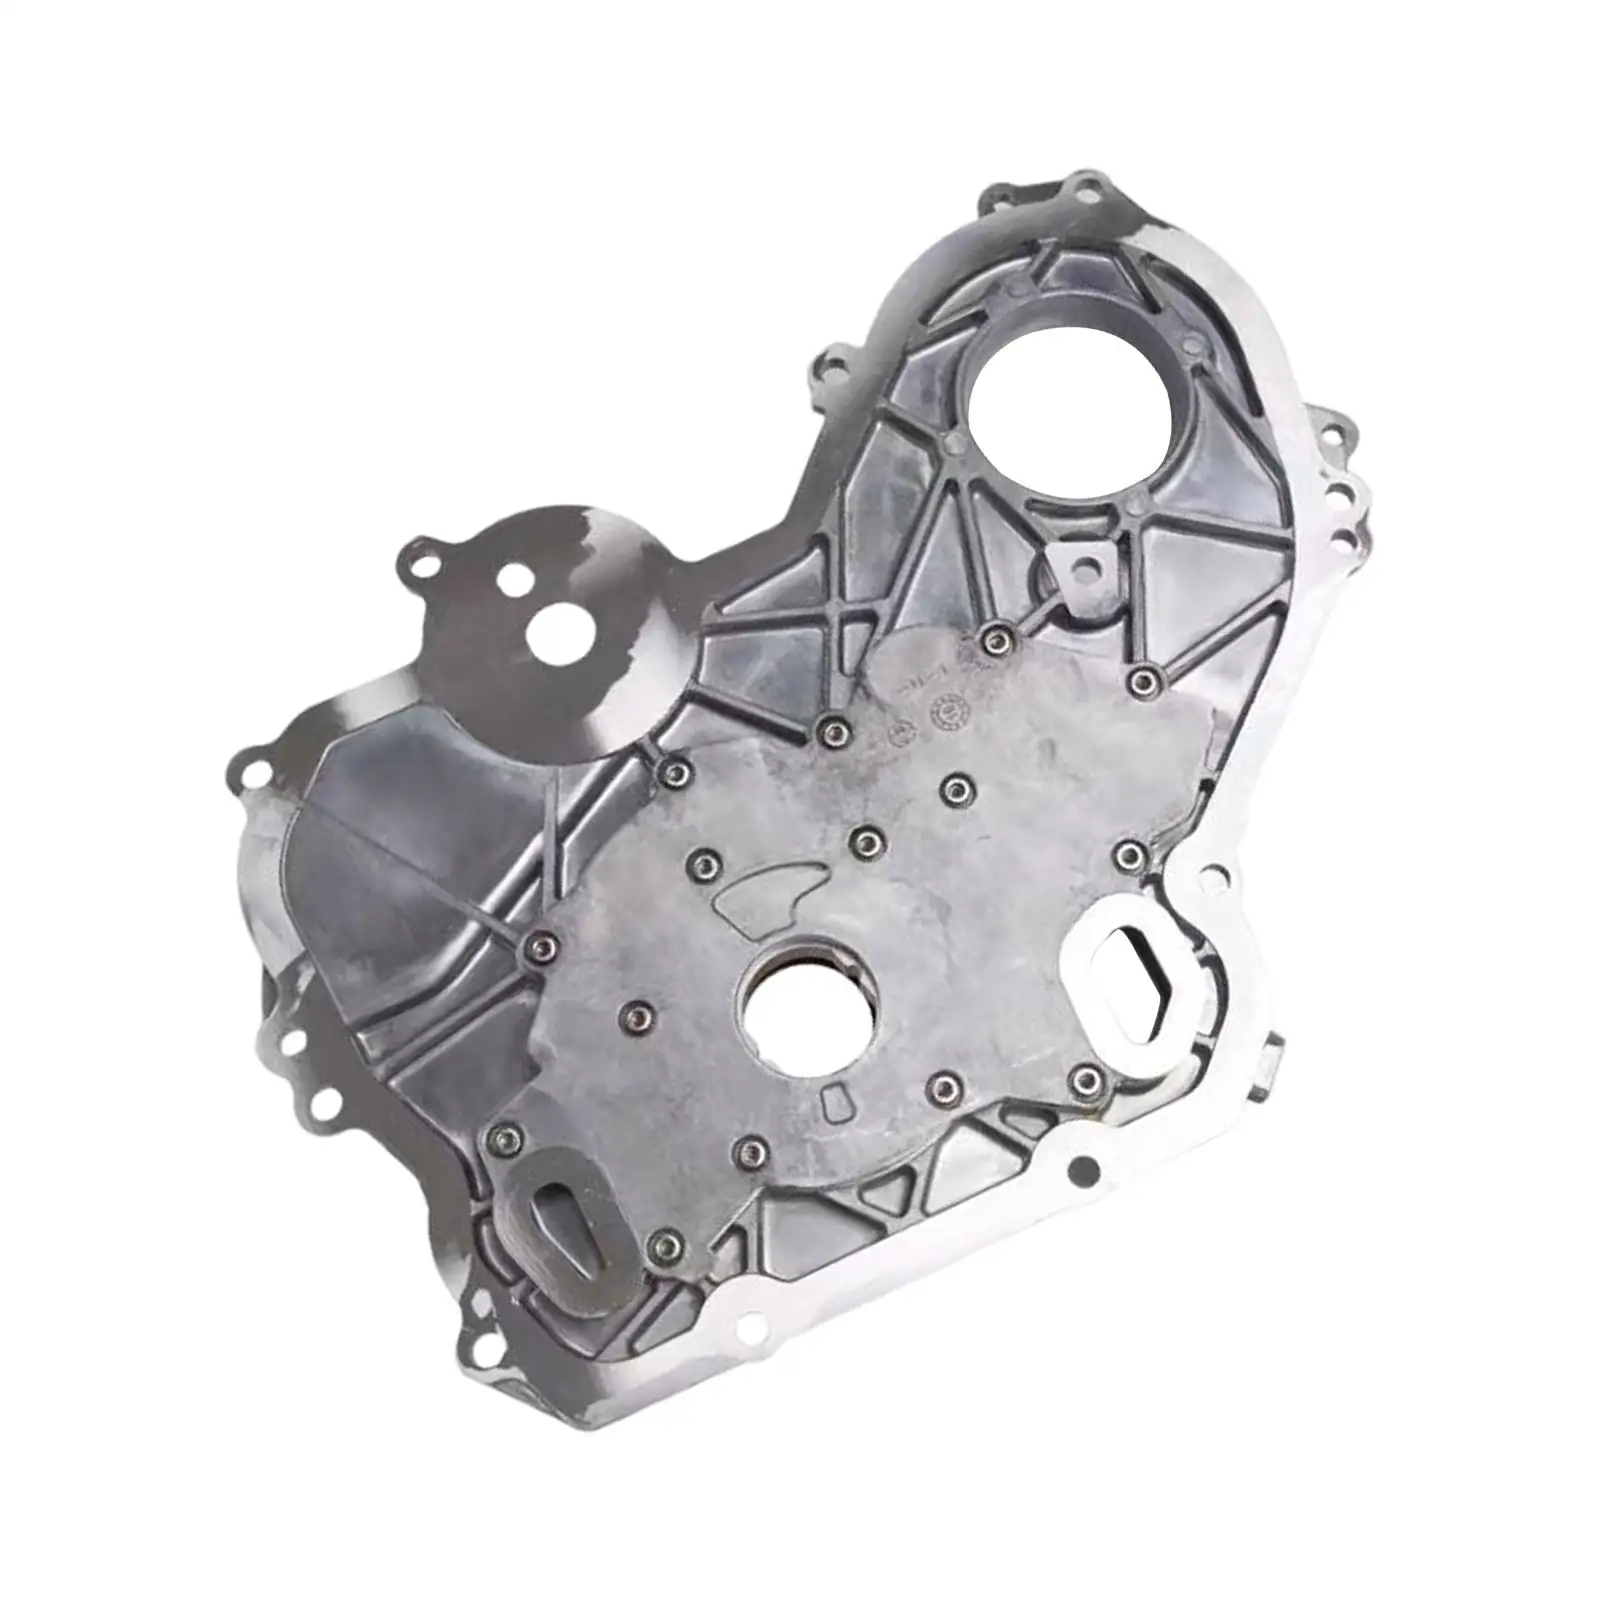 Timing Cover Oil Pump Replaces Parts 12584621 Replacement for Saturn Aura Ion L100 L200 L300 Durable Easy Installation